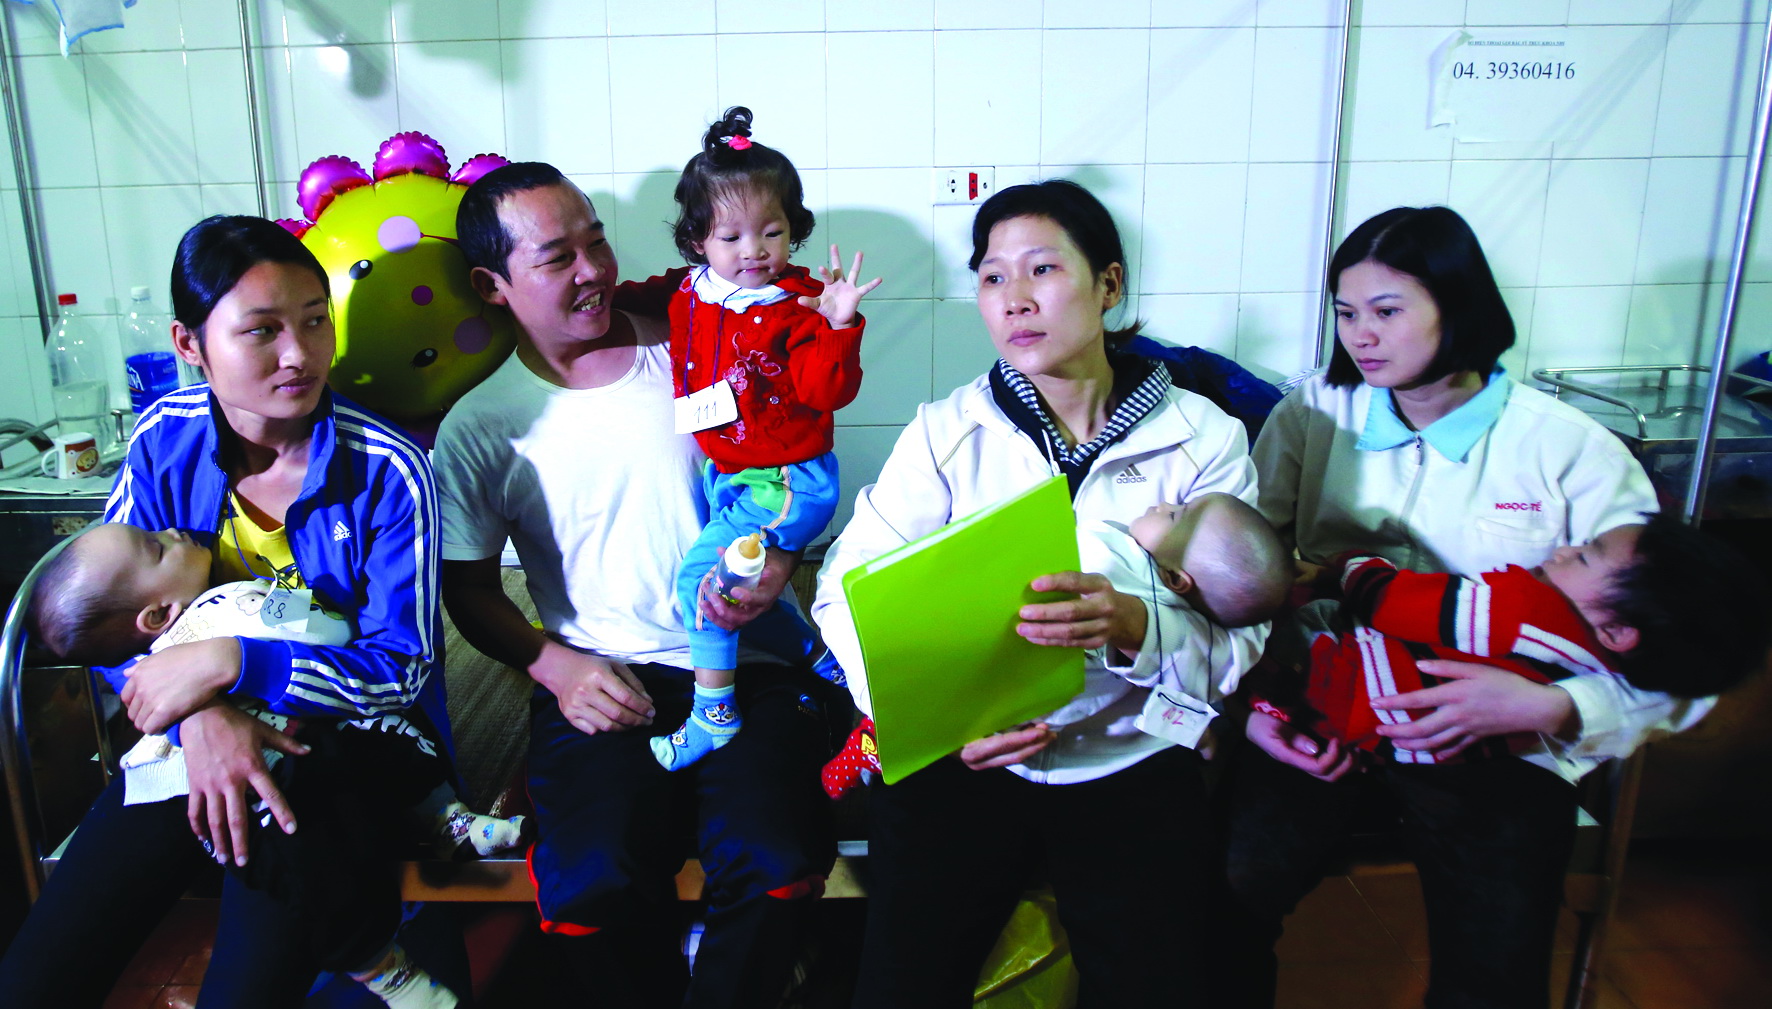 Nguyen Thi Hanh (the 2nd baby from right) was born to a father who has a cleft lip. She is among the children who have their lips remedied by Operation Smile.